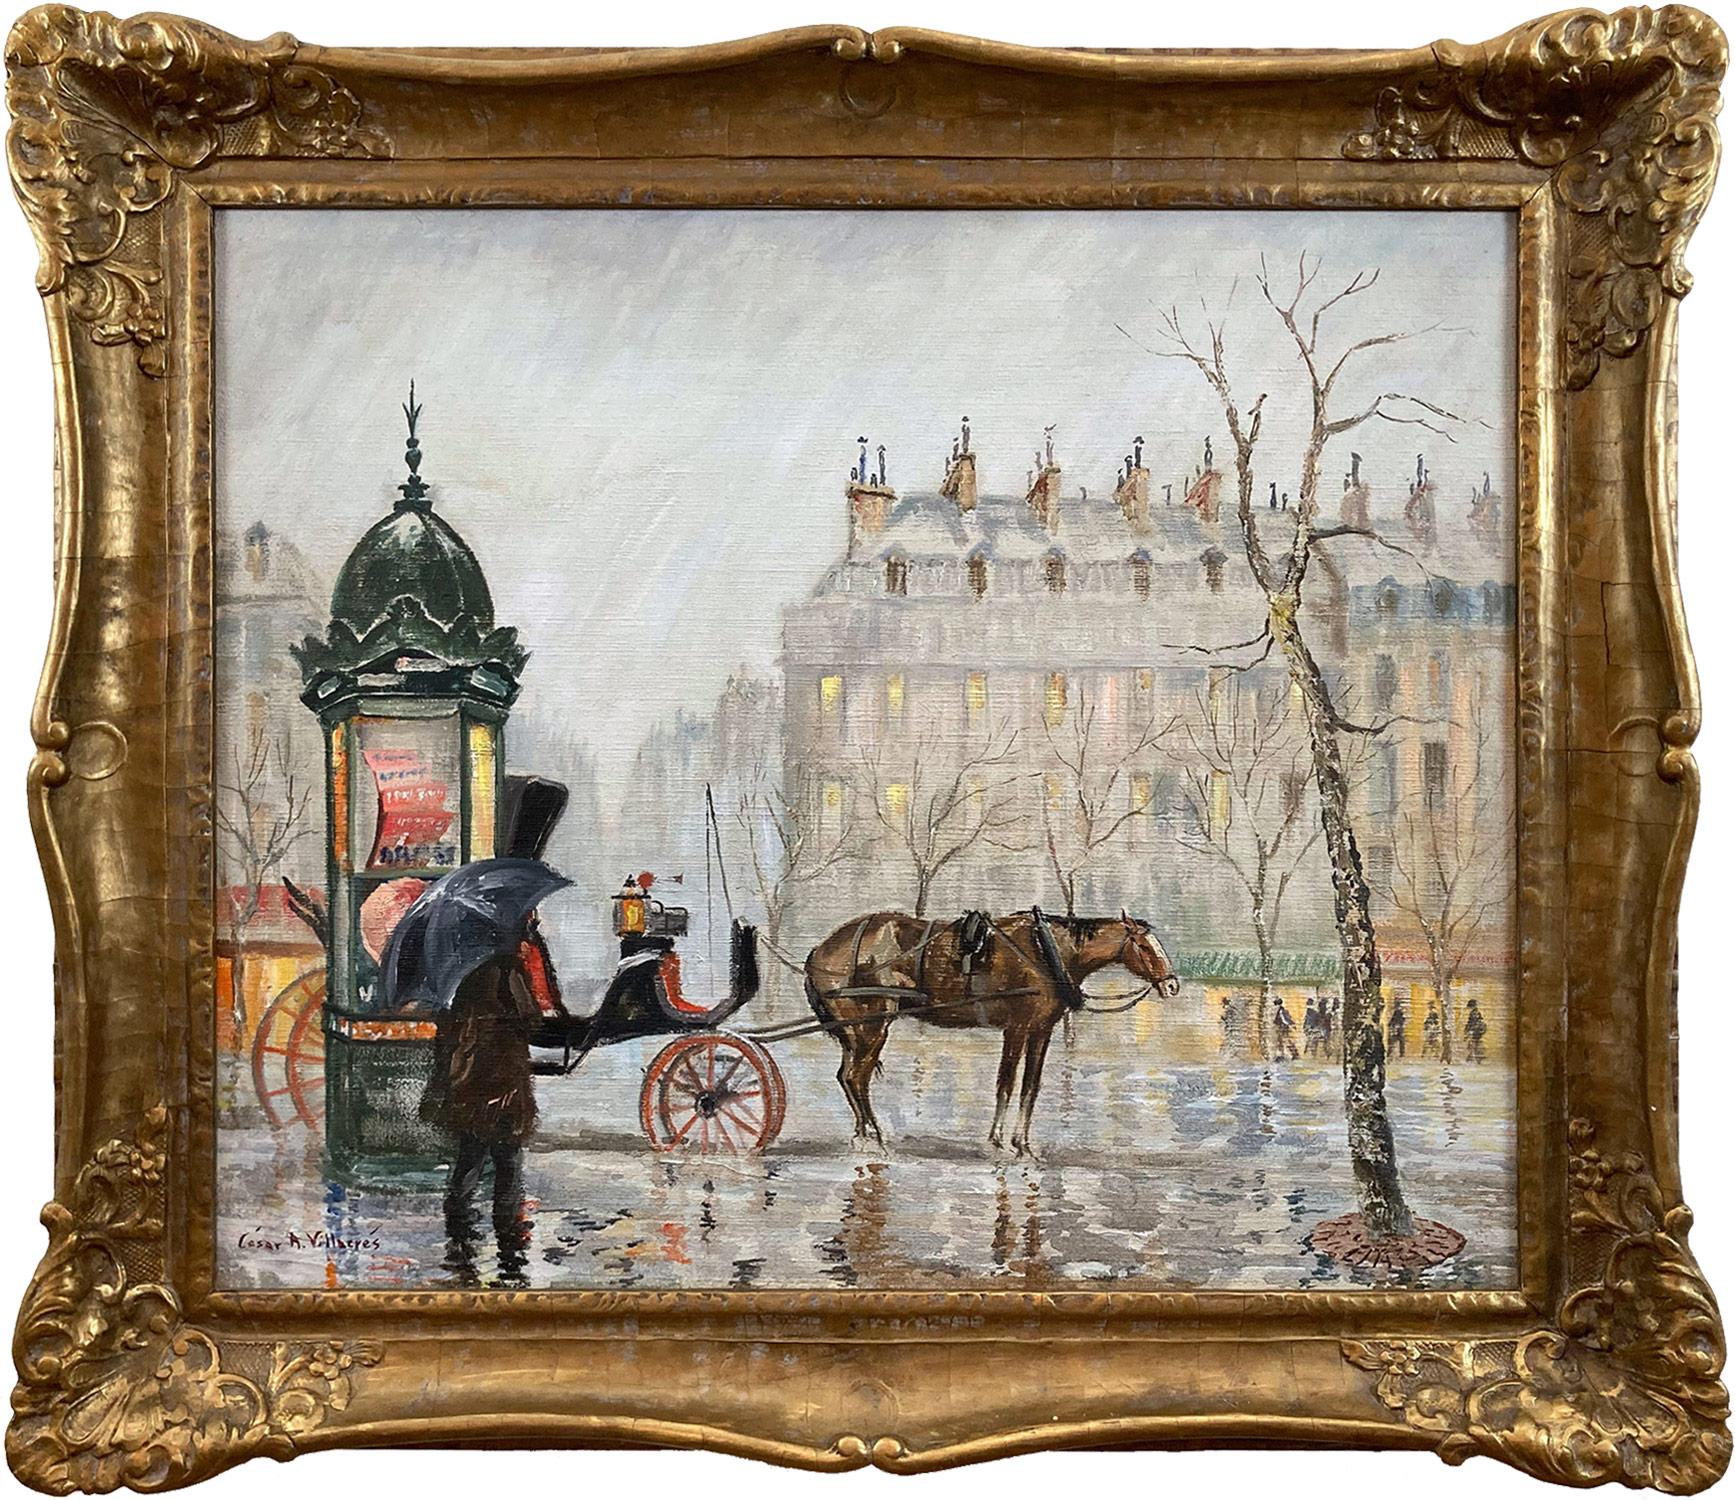 Cesar A. Villacres Figurative Painting - "Parisian Street Scene in Rain" French Impressionist Oil Painting on Canvas